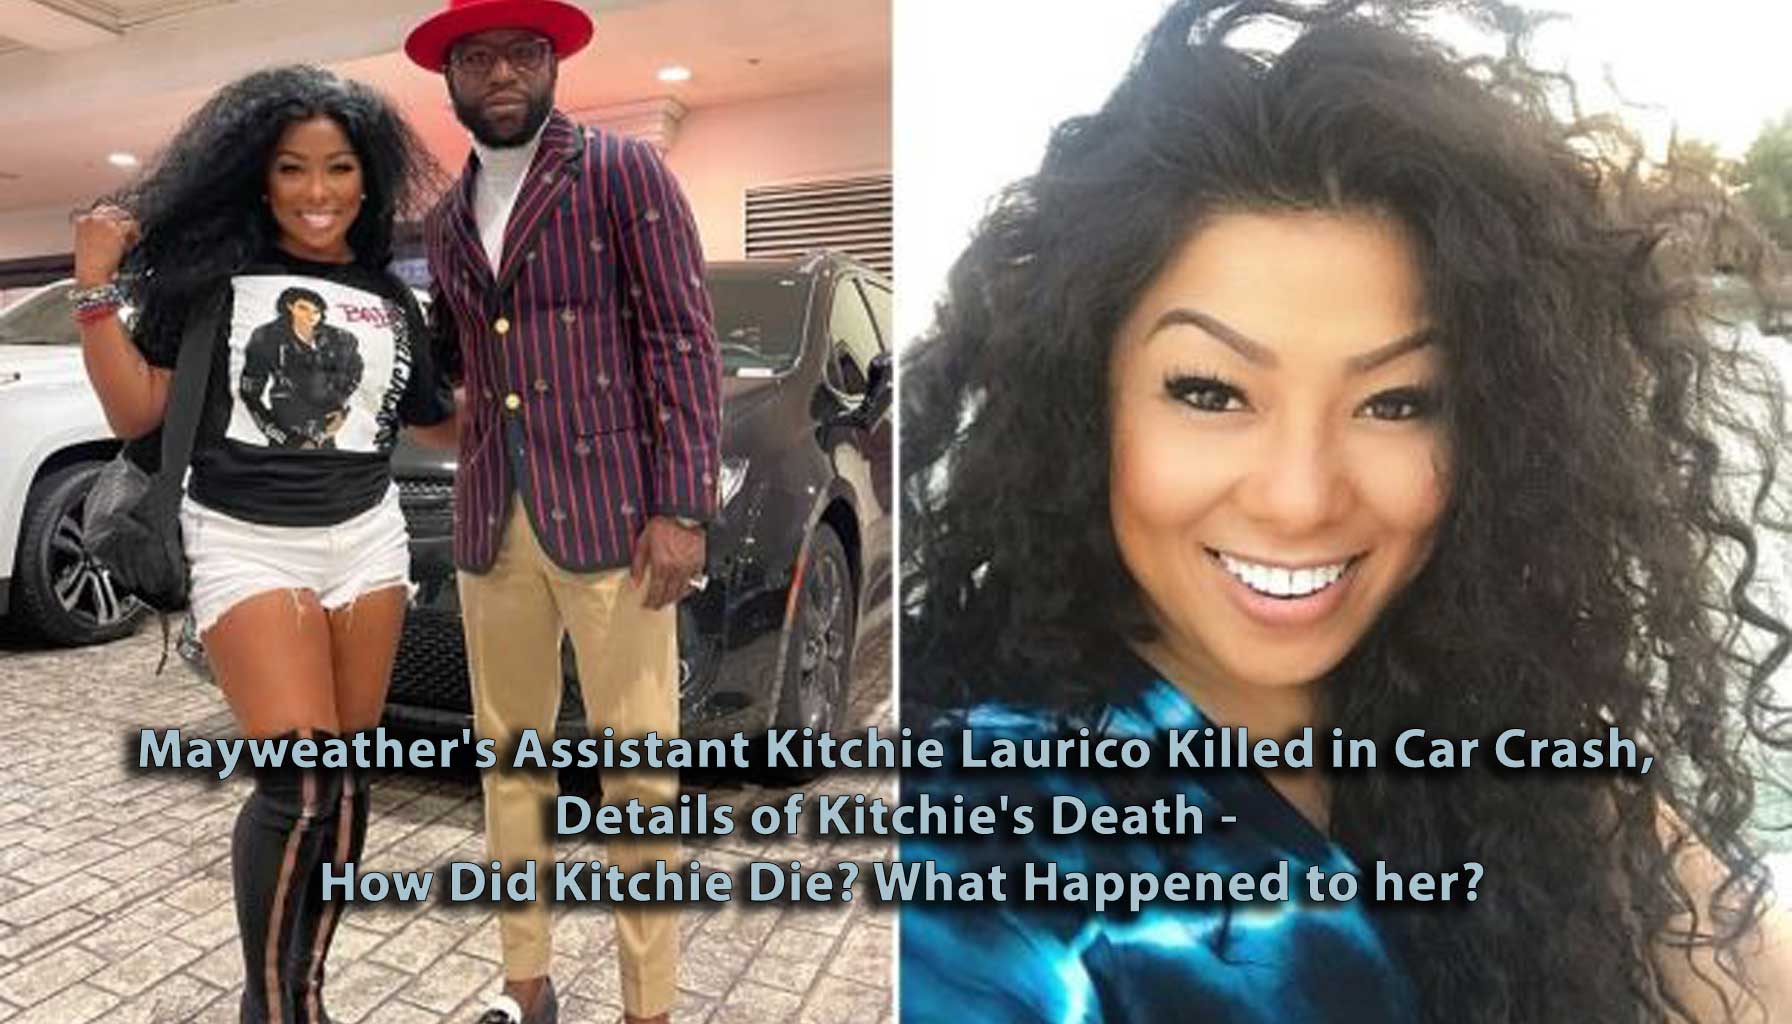 Mayweather’s Assistant Kitchie Laurico Killed in Car Crash, Details of Kitchie’s Death – How Did Kitchie Die? What Happened to her?